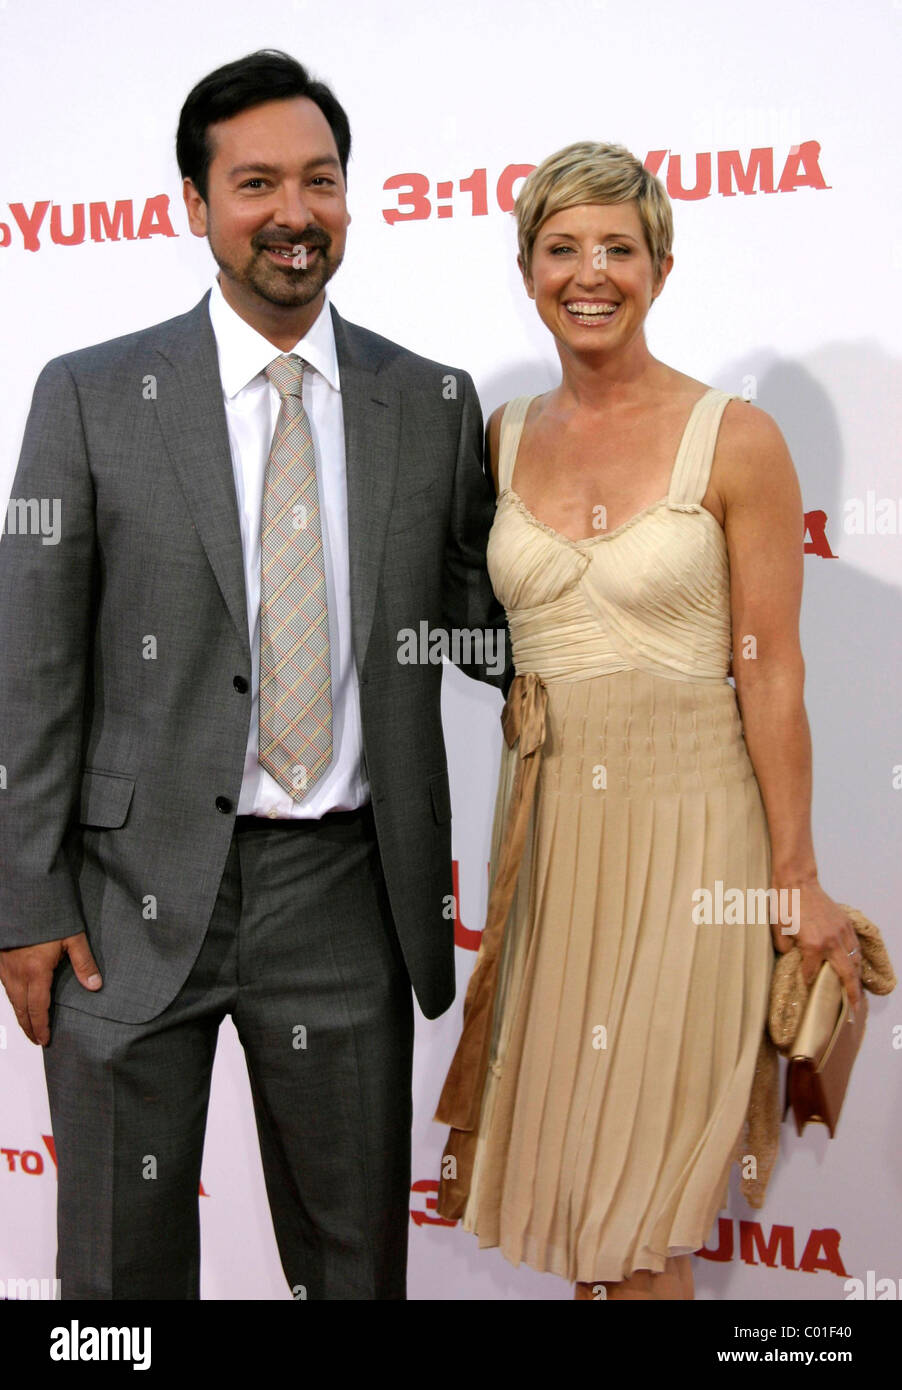 James Mangold and Cathy Konrad Premiere of '3:10 to Yuma' held at the Mann National Theatre Westwood, California - 21.08.07 Stock Photo